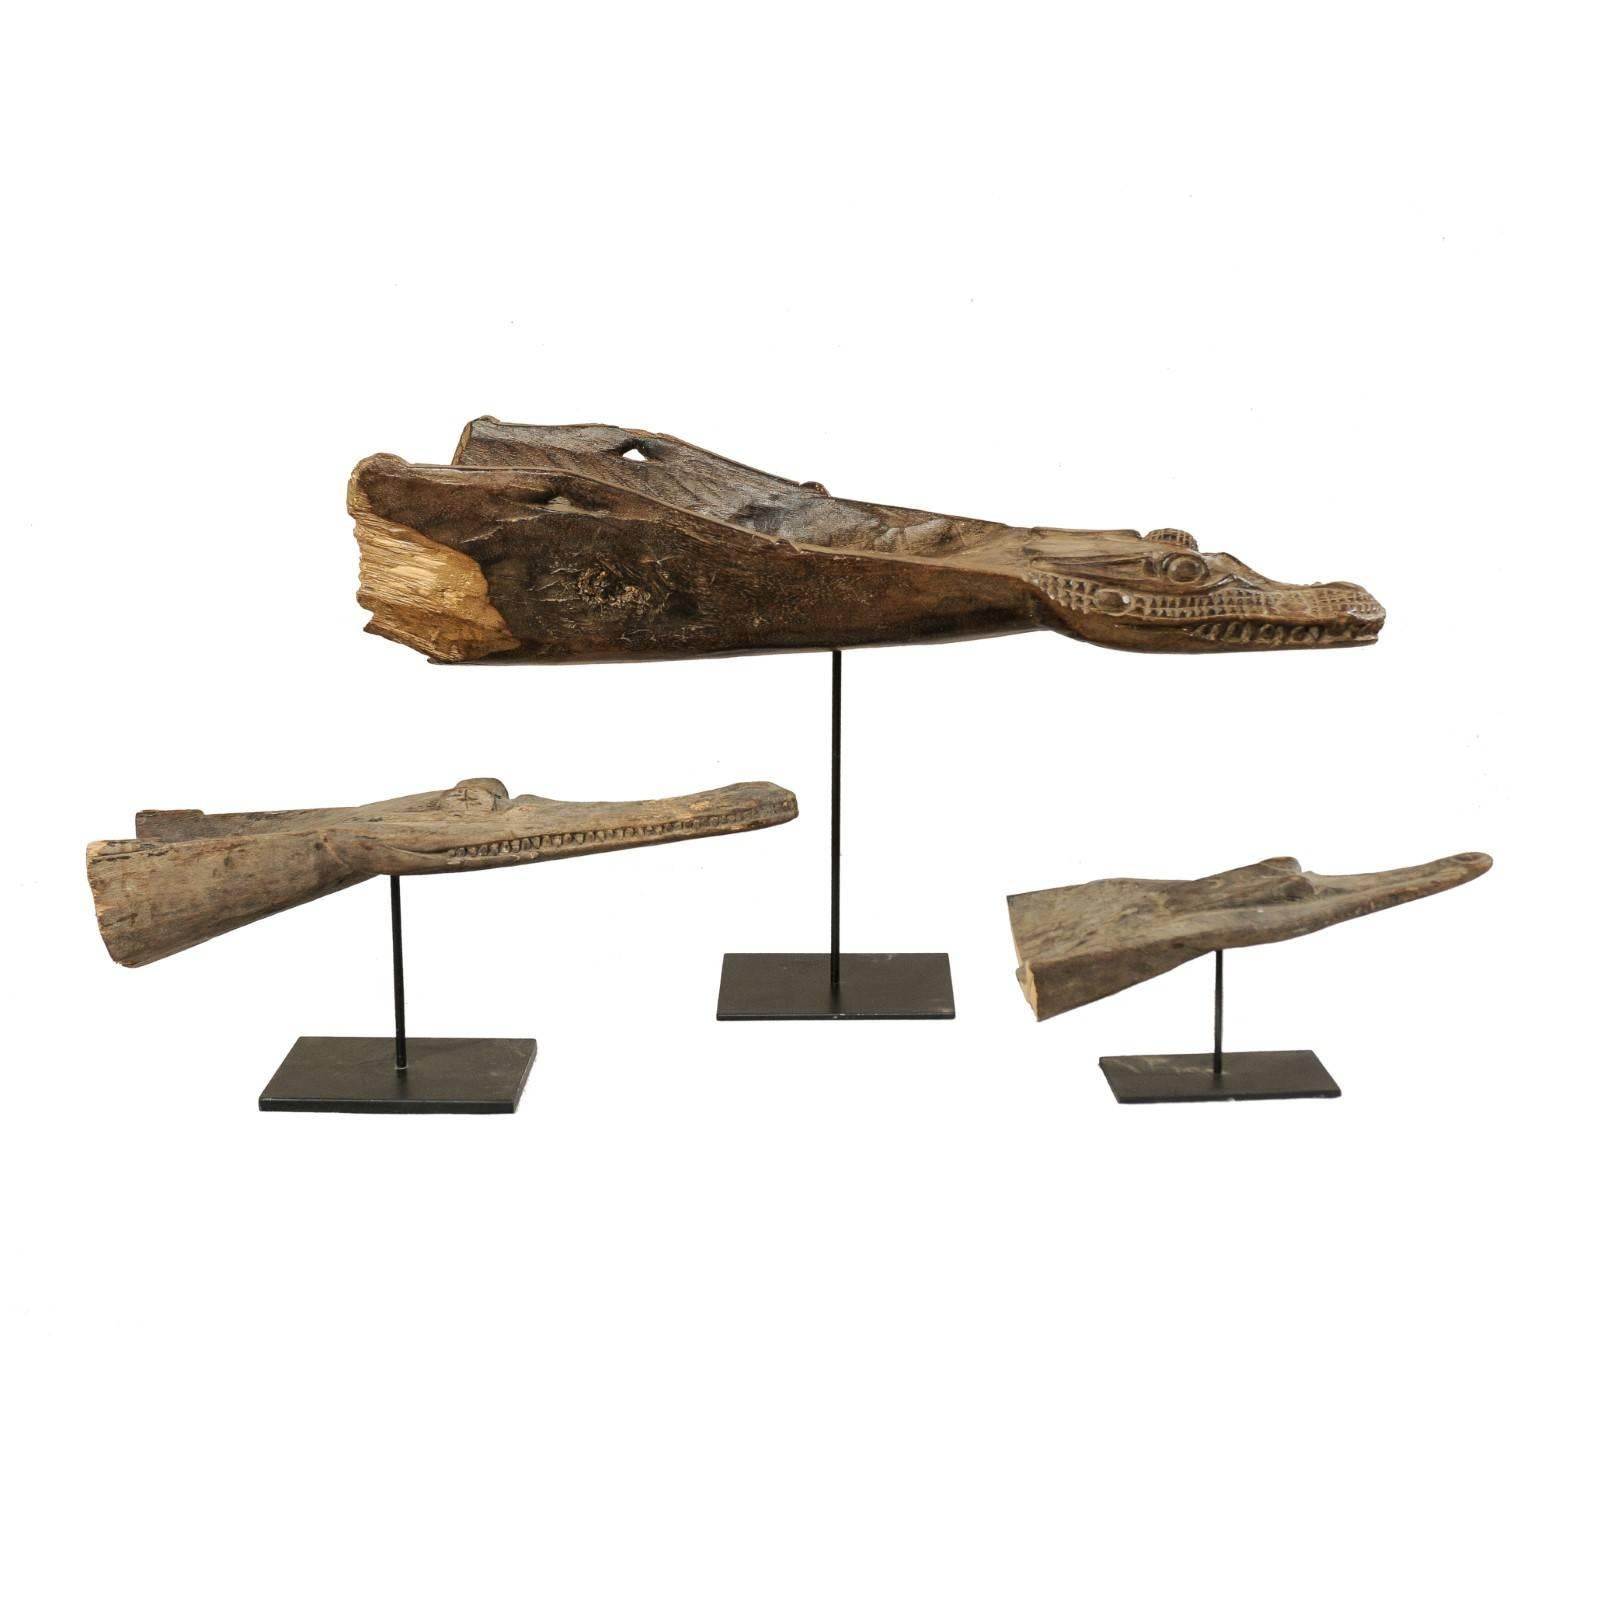 Set of Three Carved Wood Crocodile Head Boat Prows on Stands, Papua New Guinea